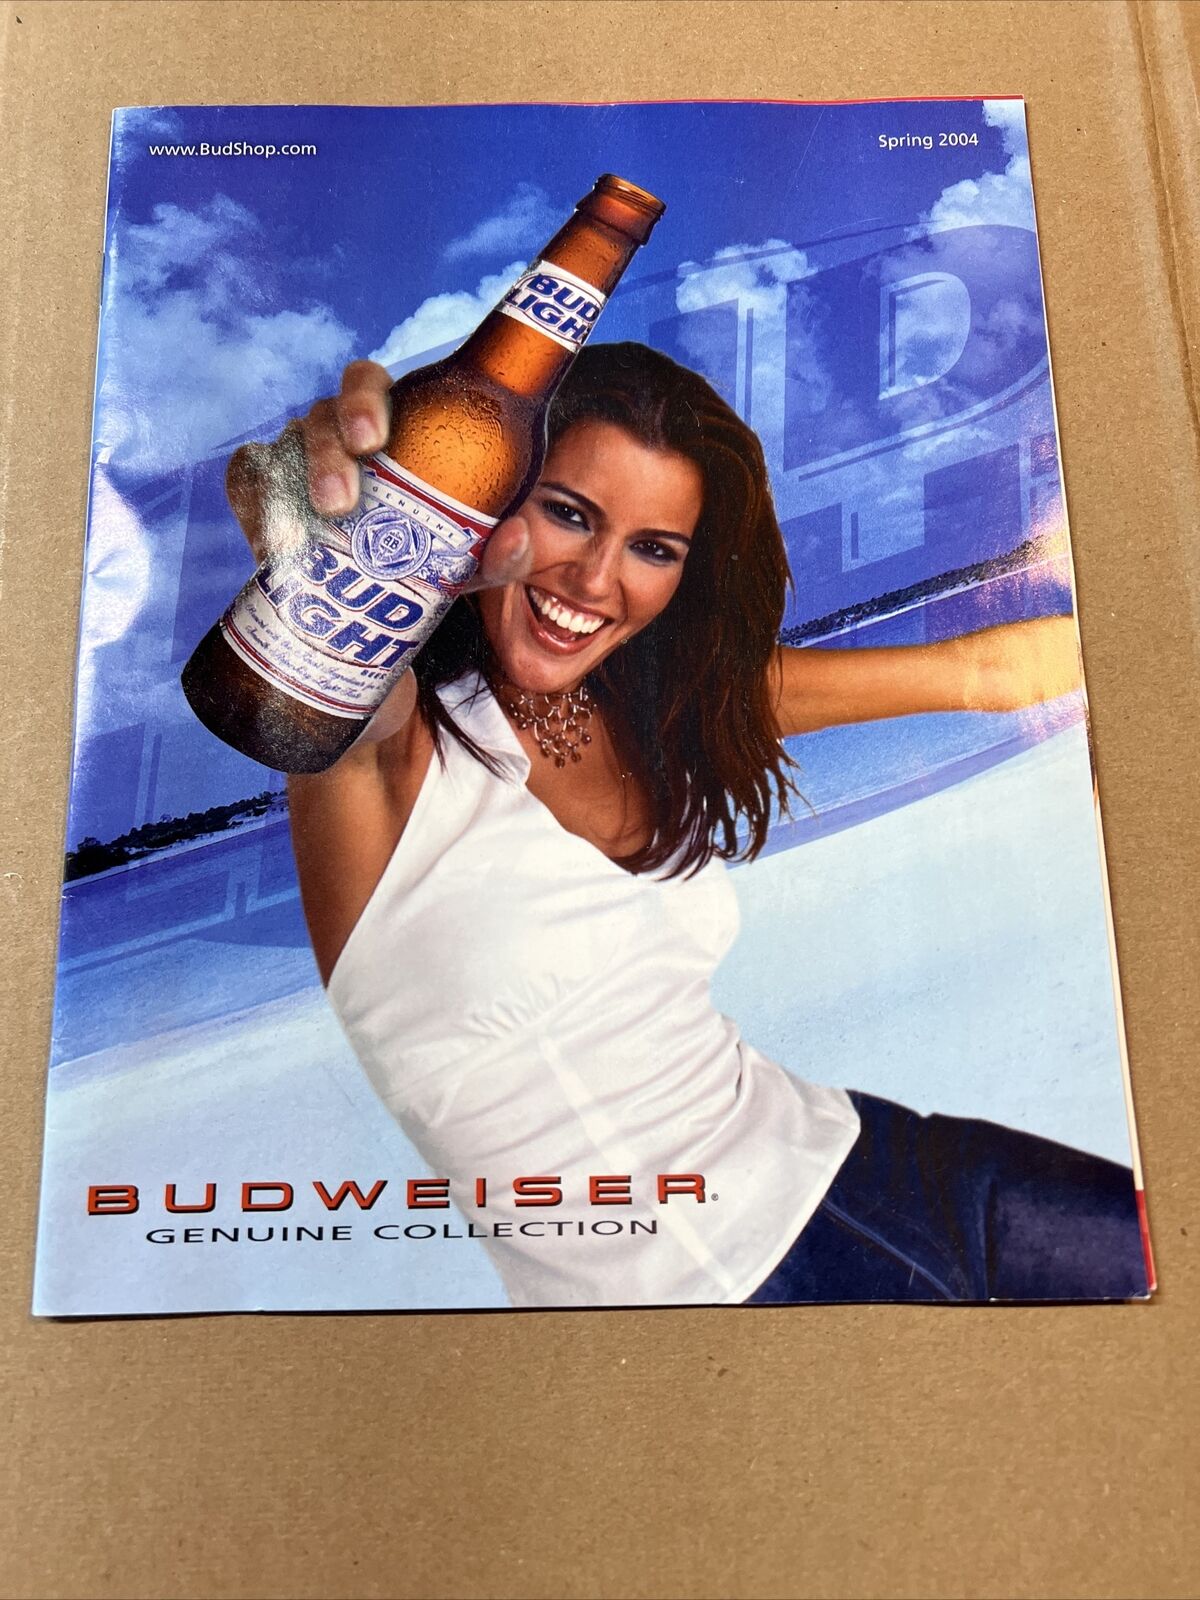 Budweiser Genuine Collection Gift Catalog - 2004